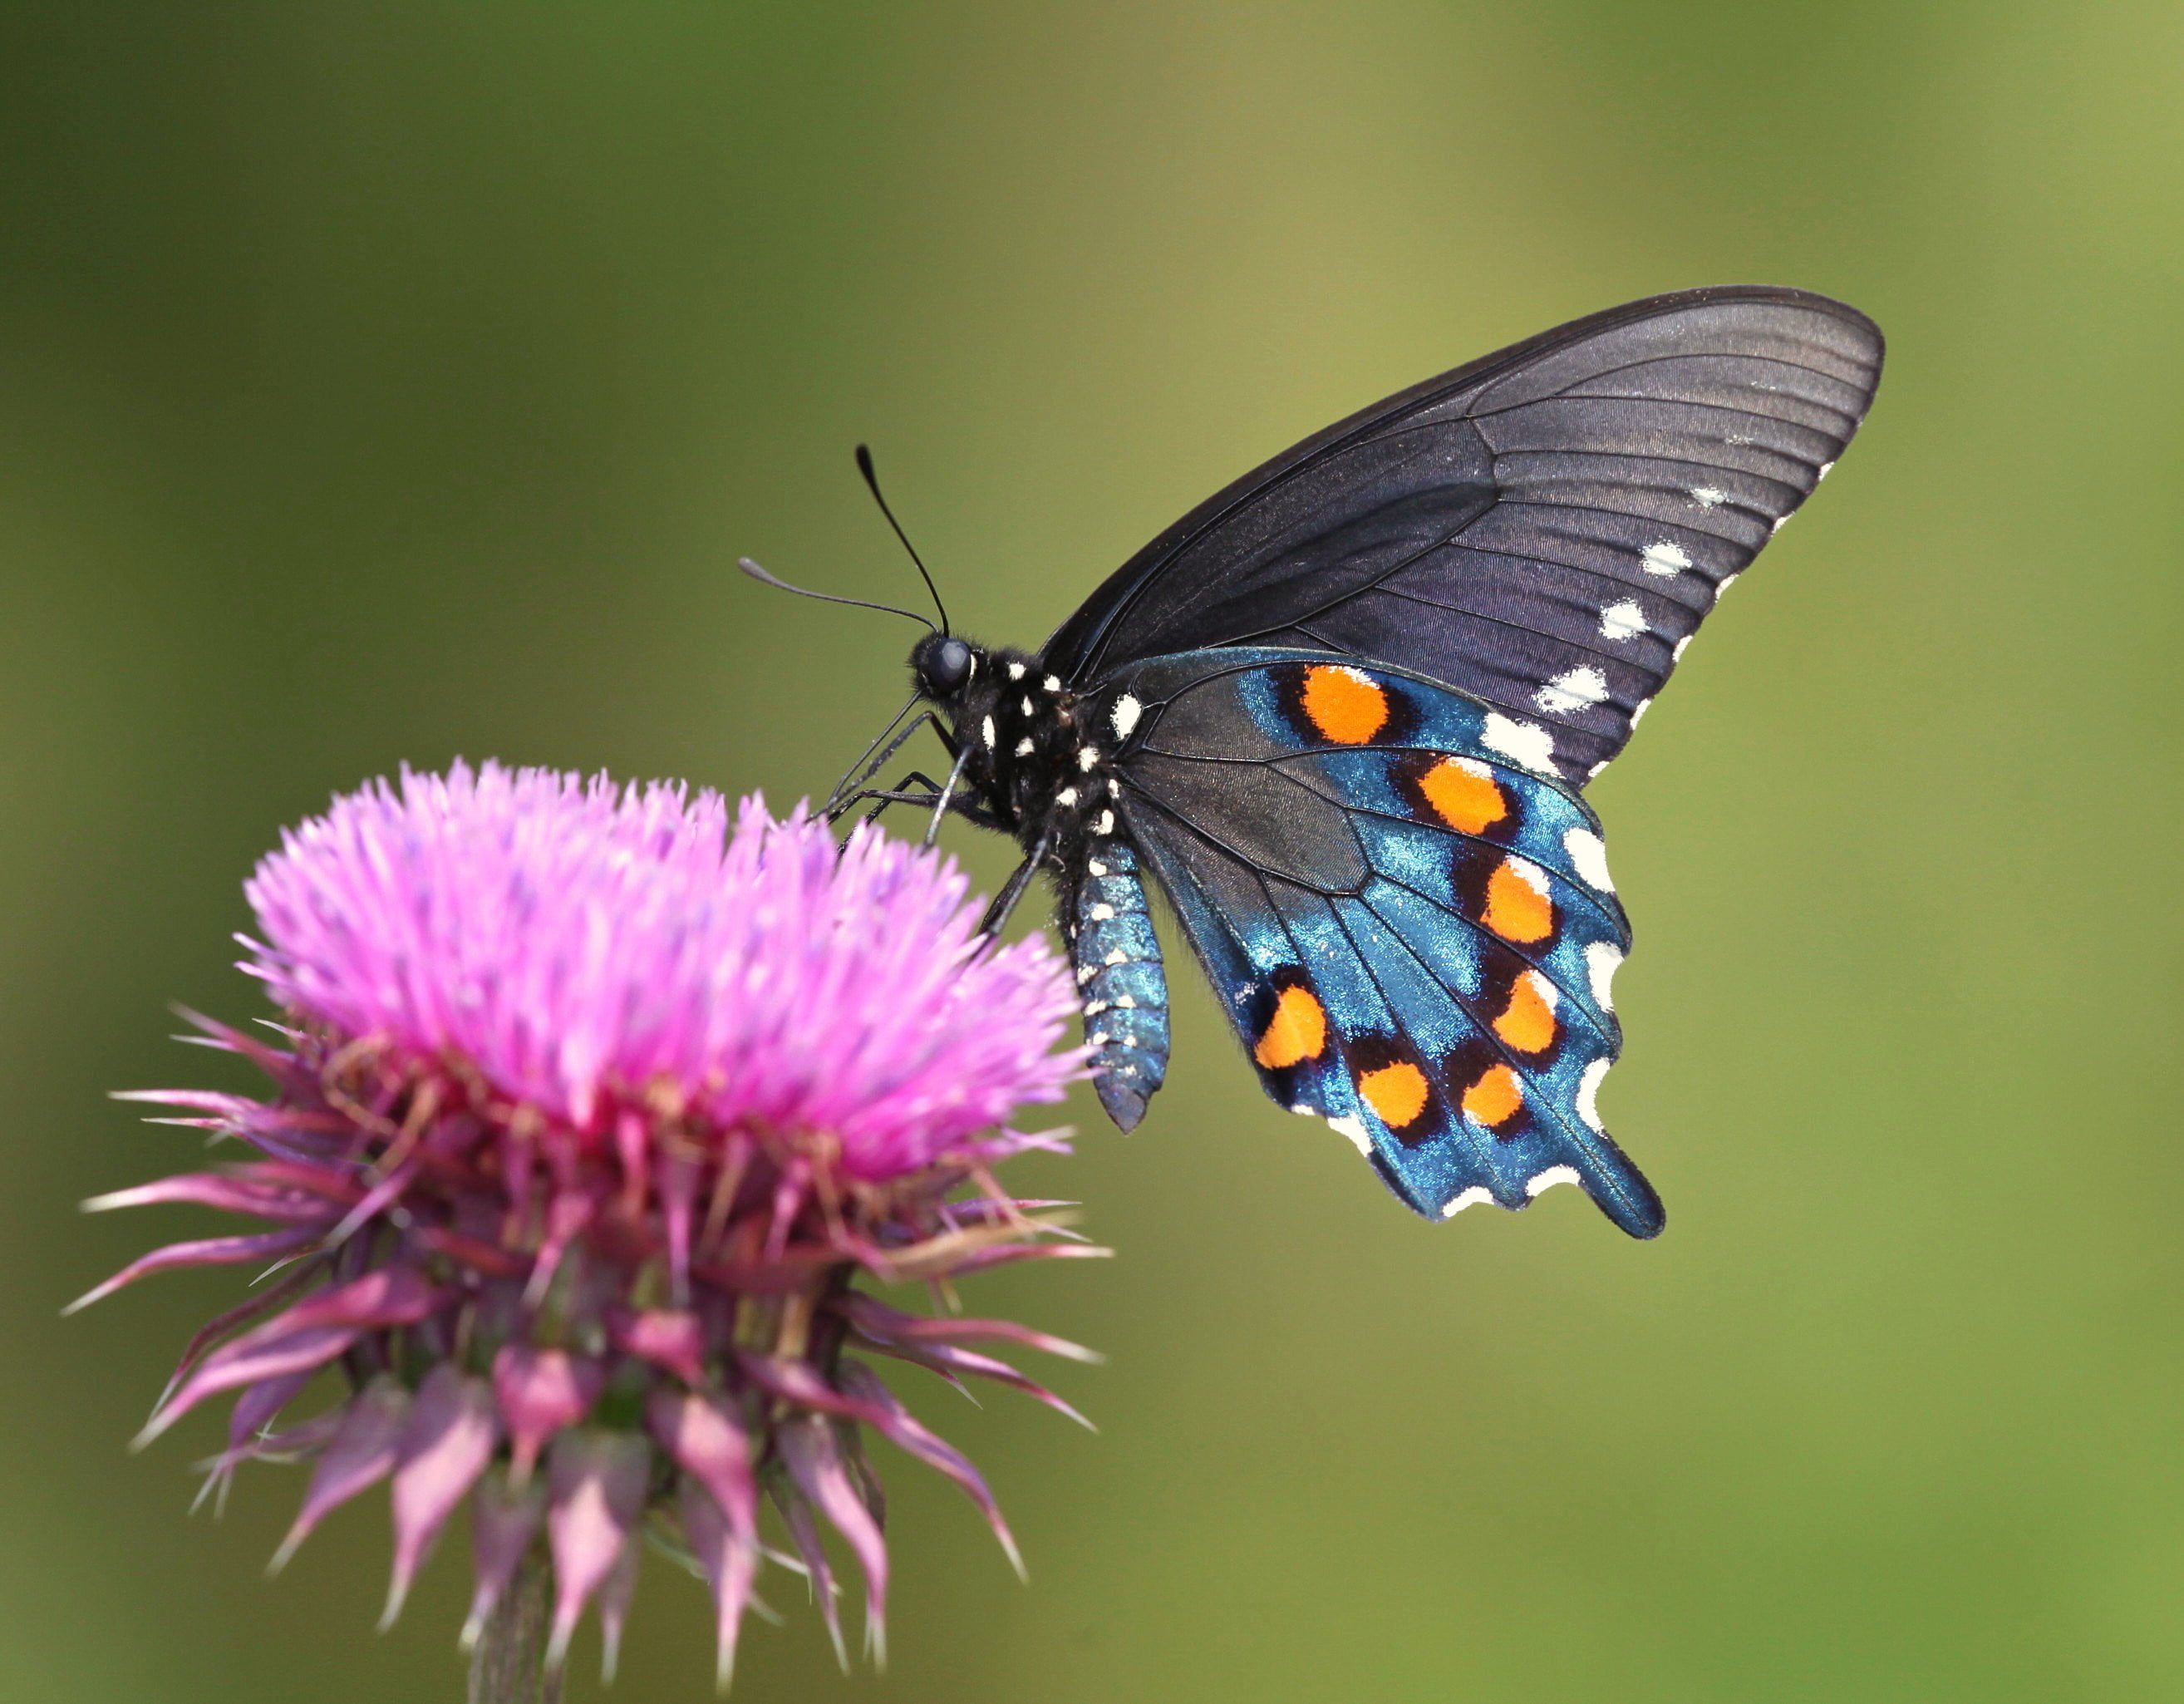 Spicebush Swallowtail Butterfly perched on purple flower buds